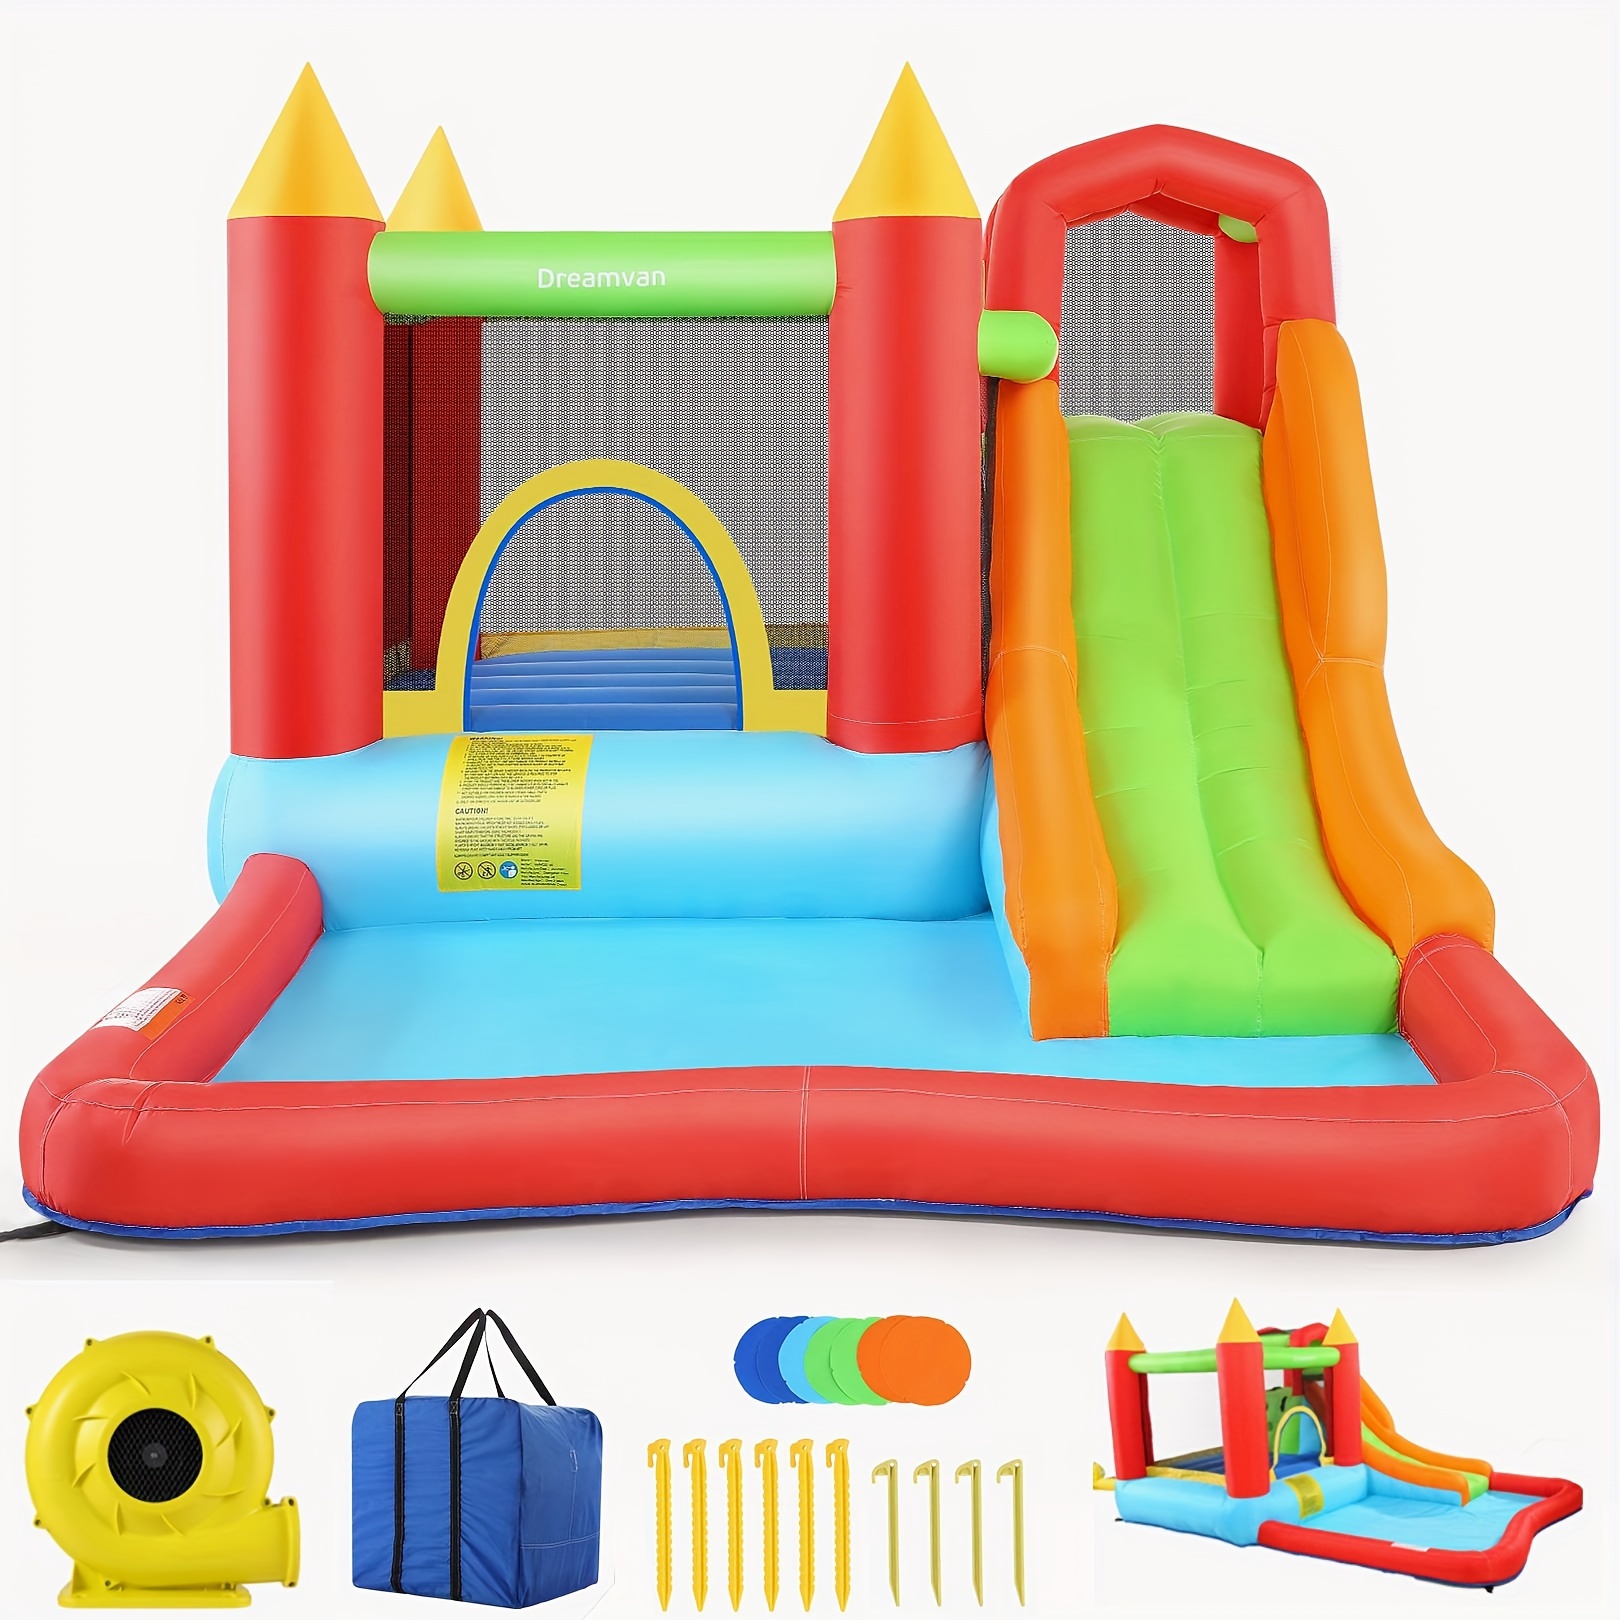 

Inflatable Bounce Bouse Bouncy Castle With Blower, Outdoor/indoor Bouncy House Water Park For Backyard With Splash Slide, Climbing Wall, Ball Pit, Jumping Area (146" X 103" X 73")